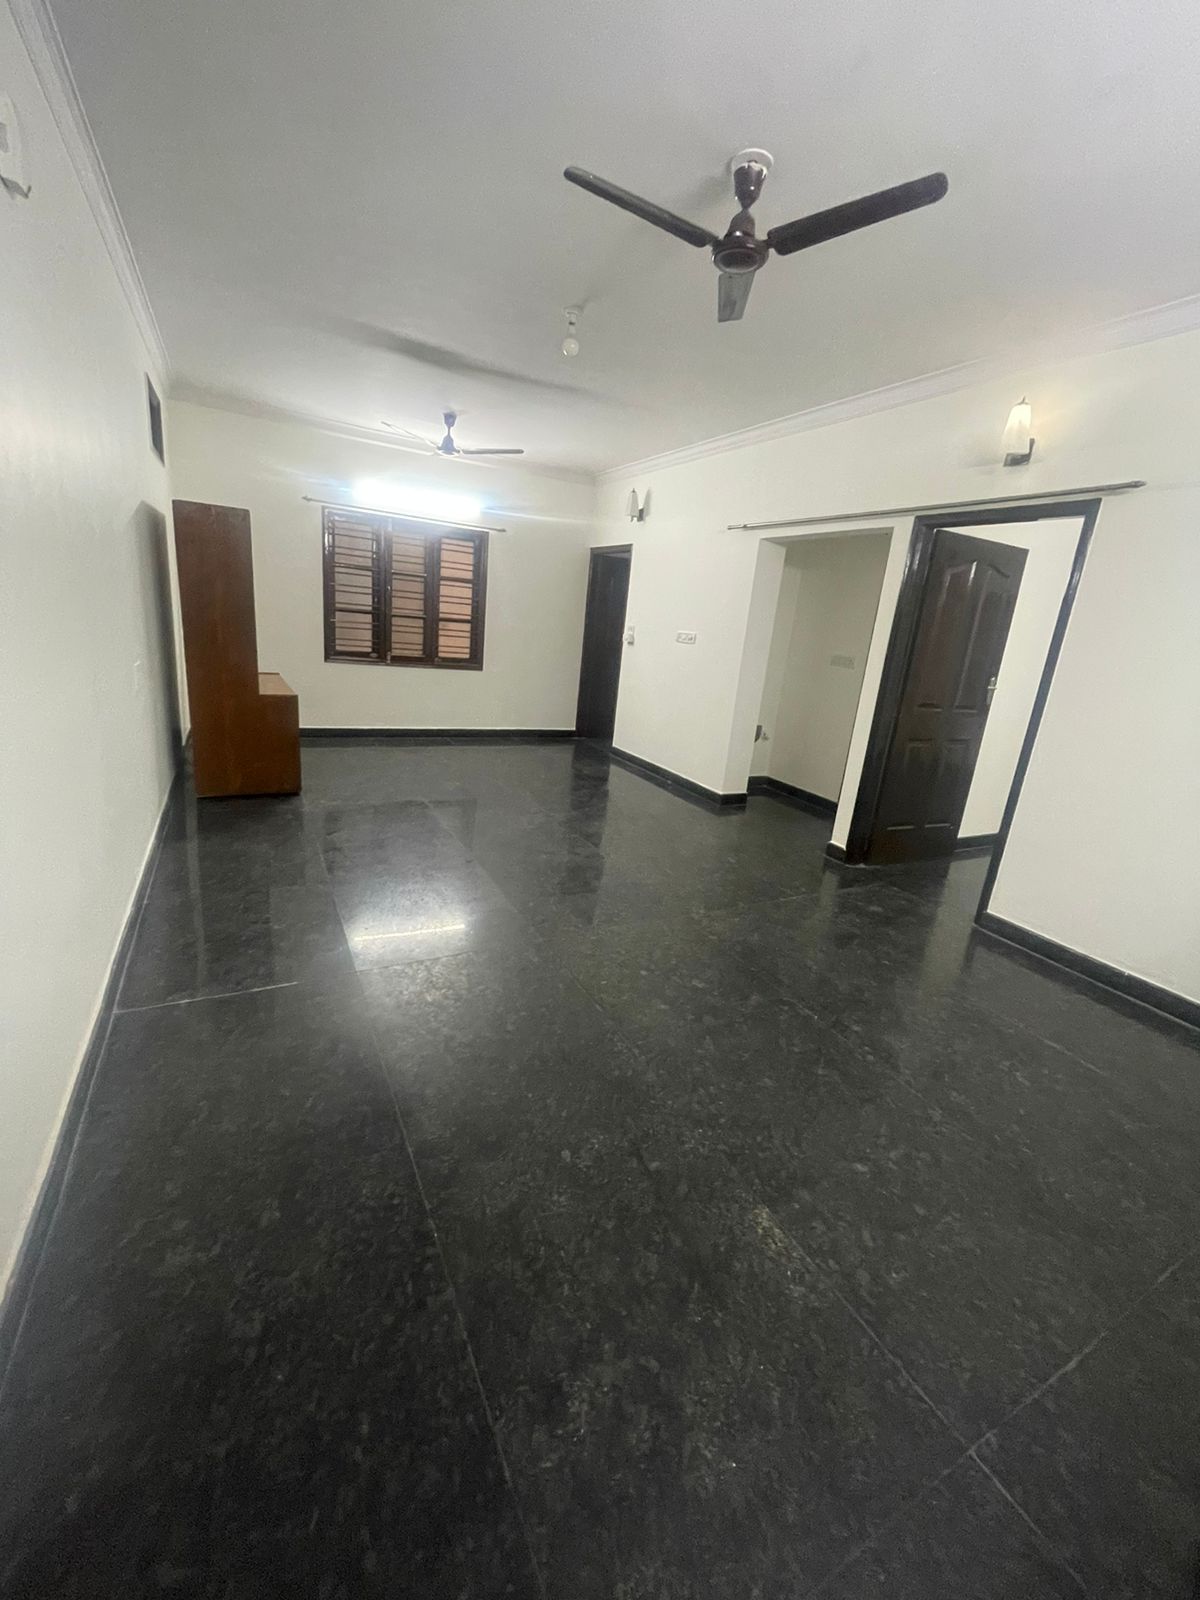 2 BHK Residential Apartment for Lease Only at JAML2 - 4319 in Kengeri